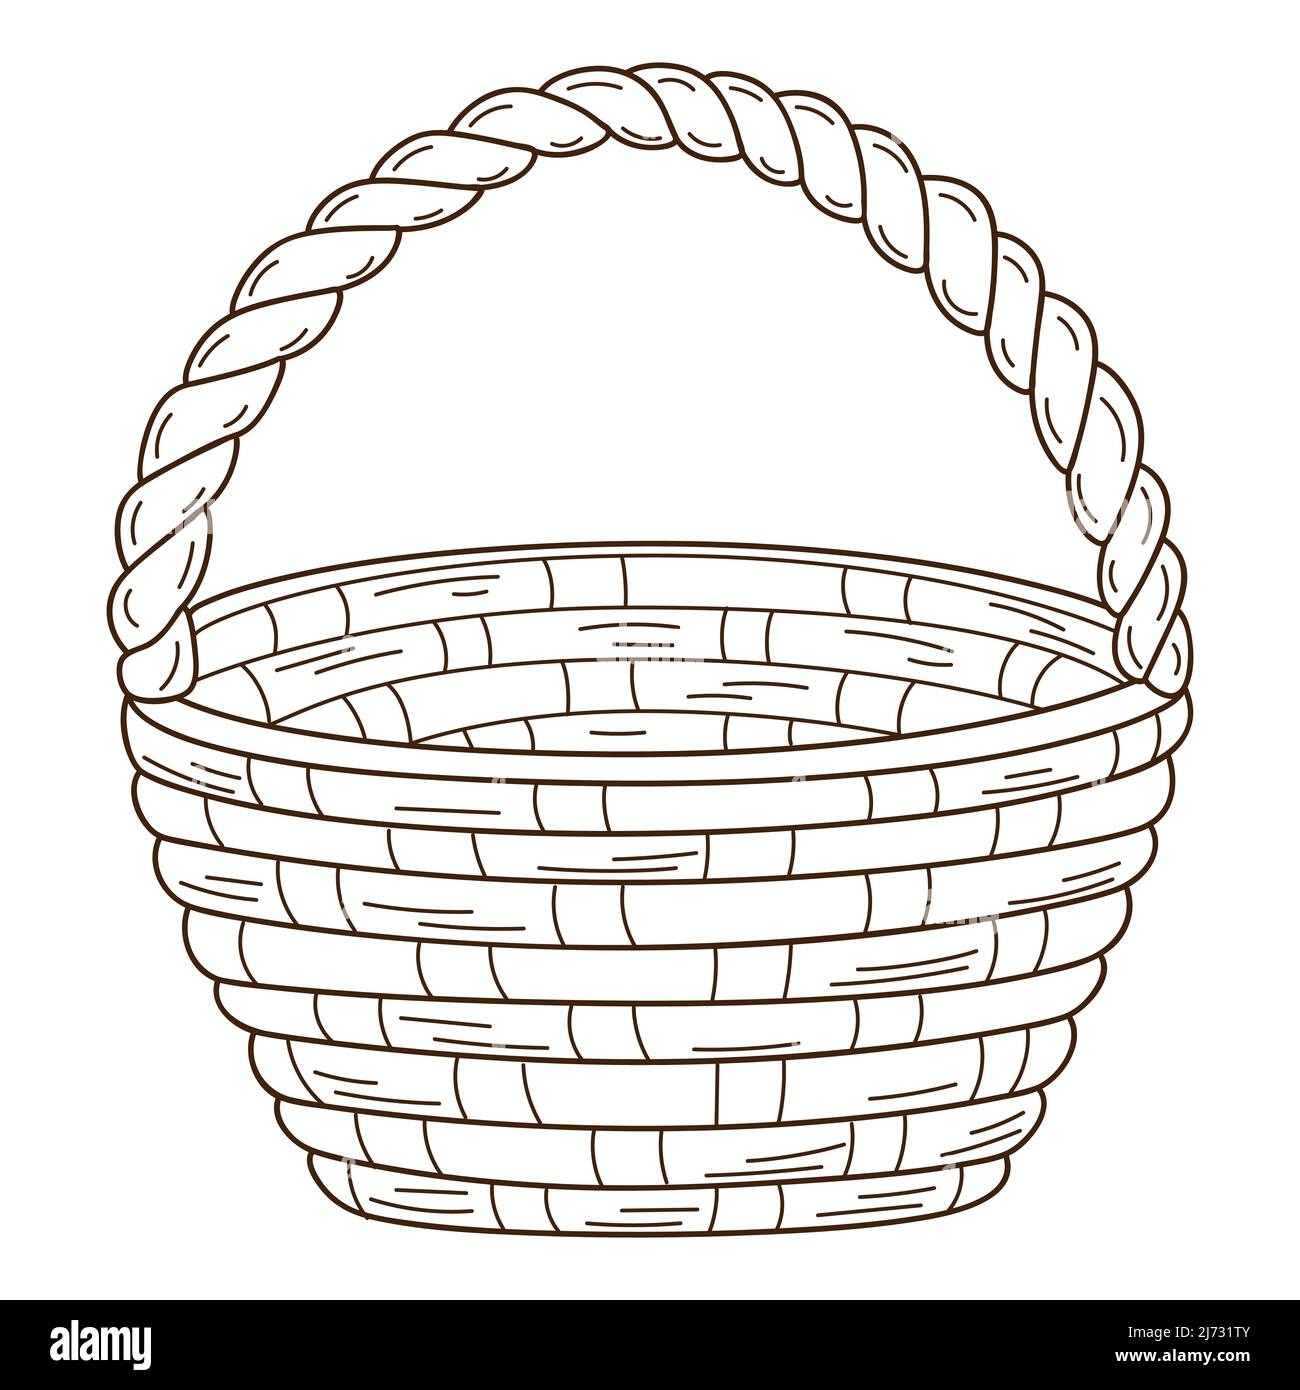 An empty wicker basket. Decorative element with an outline. Doodle, hand-drawn. Black white vector illustration. Isolated on a white background. Stock Vector